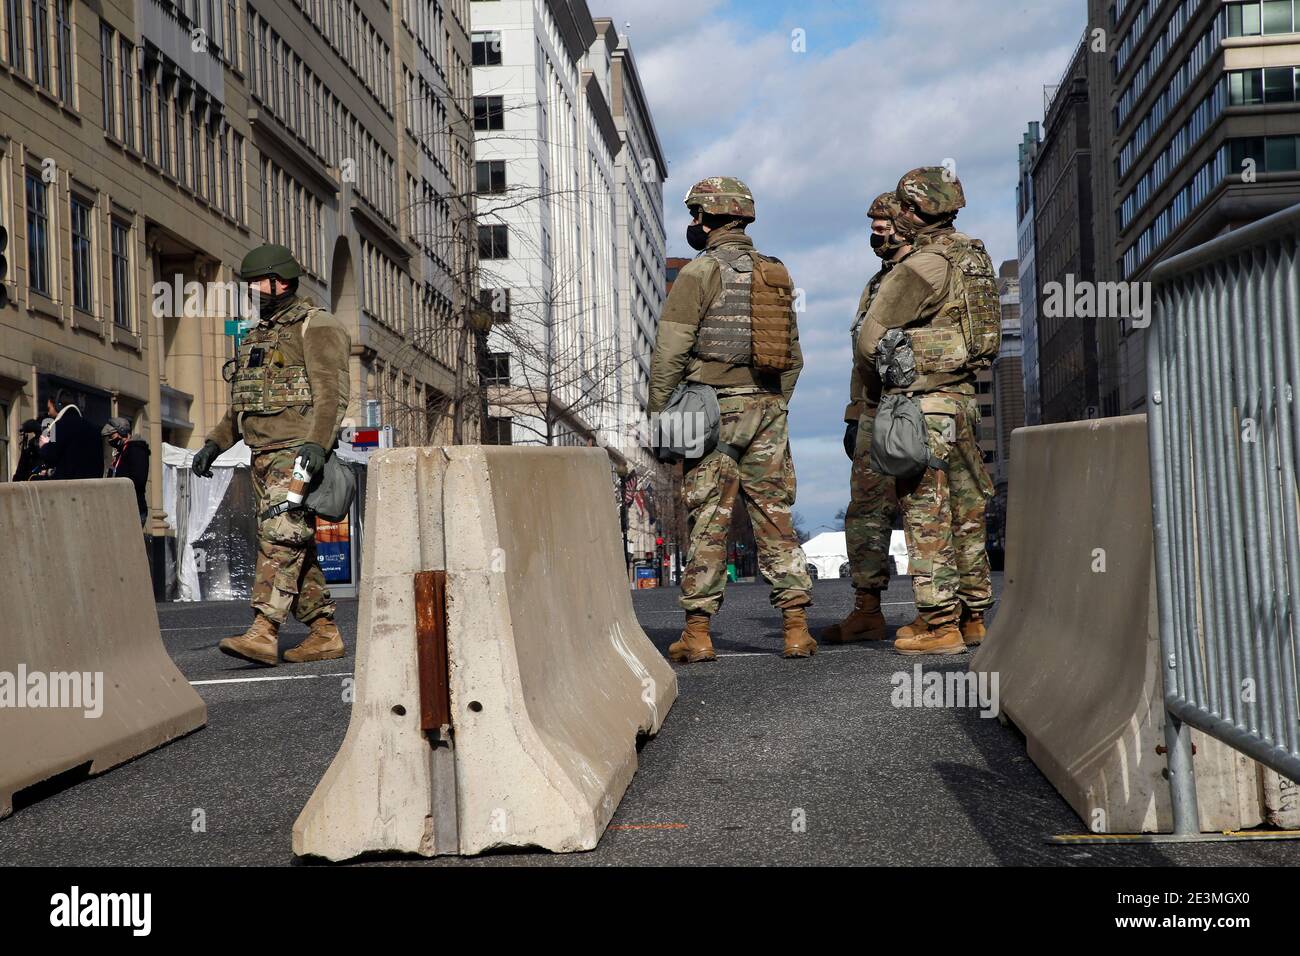 Washington, United States. 19th Jan, 2021. Military personnel stand on guard near the Capitol.After the January 6th riots at the US Capitol, the FBI has issued a statement warning of further threats to the nation's capital as well as in all fifty states. In the waning hours of the current administration some 25,000 National Guardsmen have been deployed to the city to stand guard in preparation for Joe Biden's inauguration as the 46th U.S. President. Credit: SOPA Images Limited/Alamy Live News Stock Photo